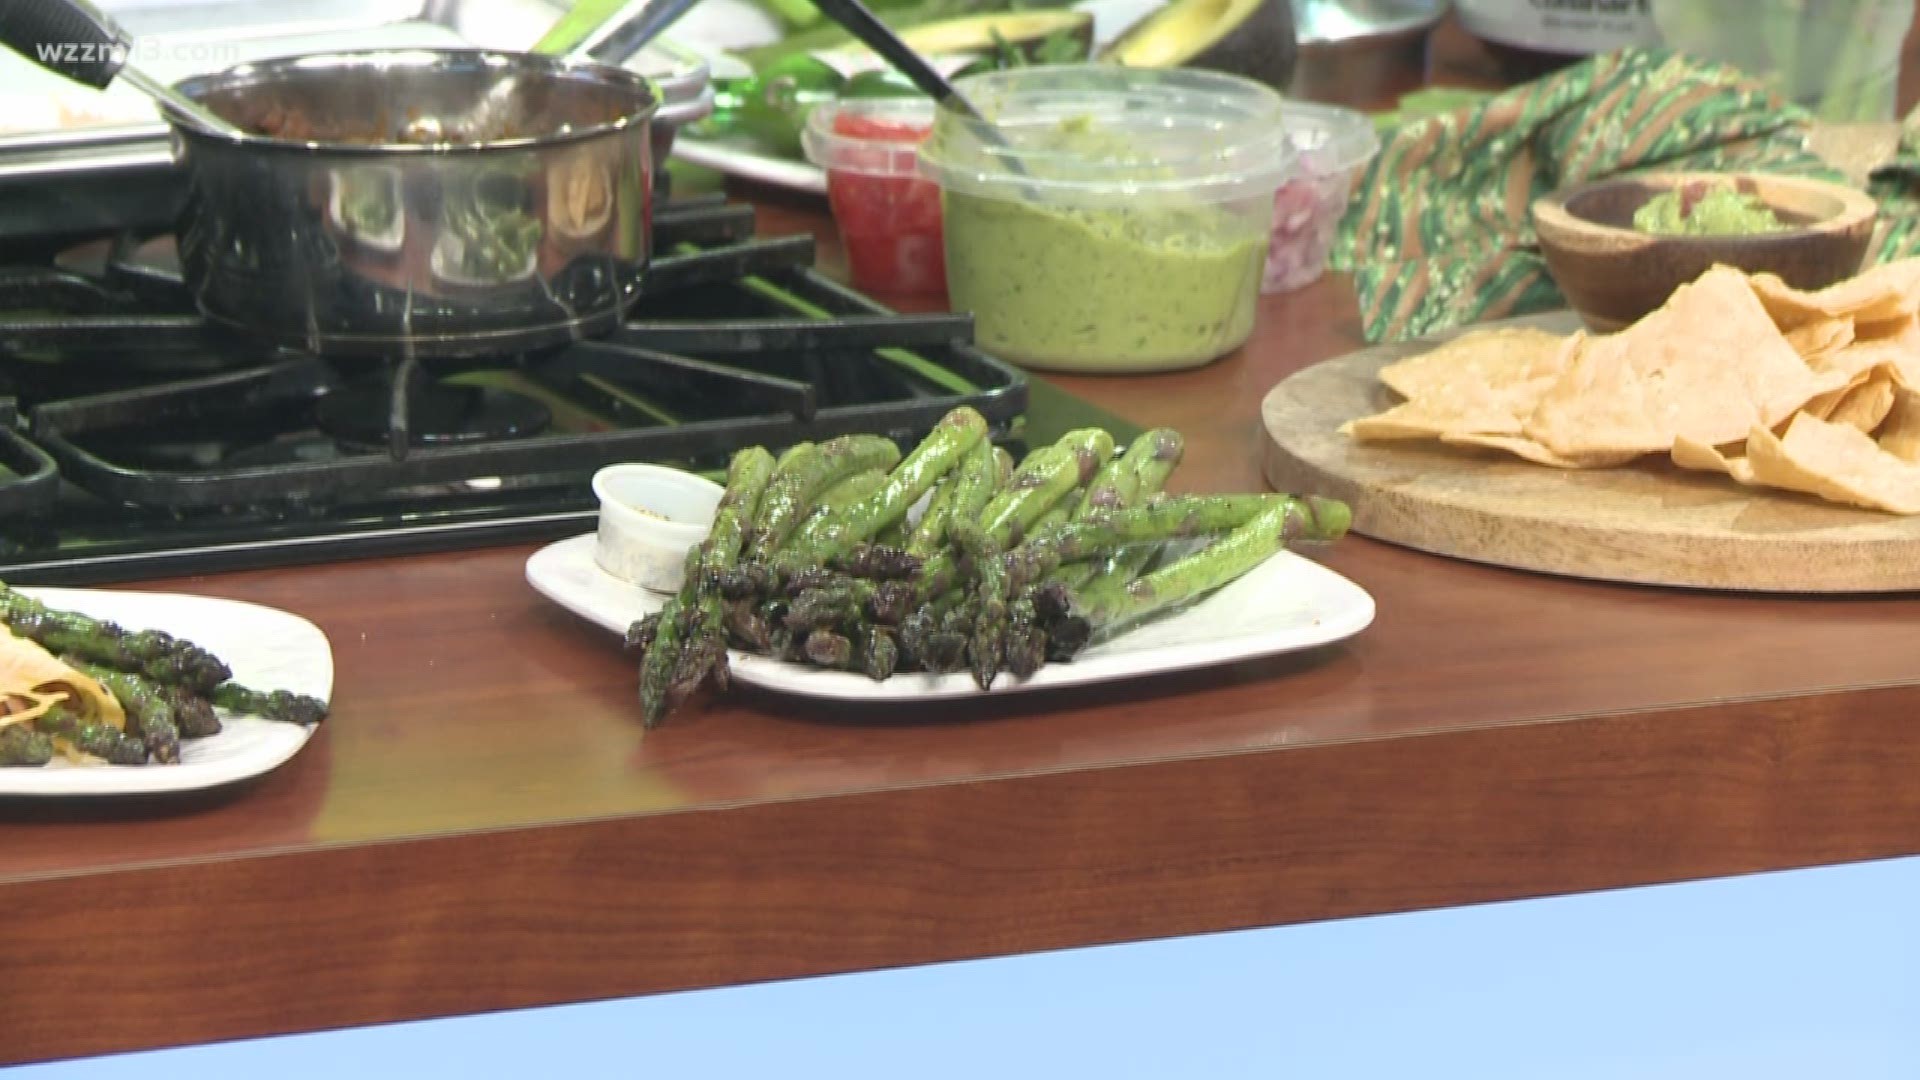 Asparagus season in Michigan is finally here and there are so many unique and delicious ways to plate it! Food blogger Gina Ferwerda joined My West Michigan to share some tasty recipes and some helpful tips for the best asparagus season yet!